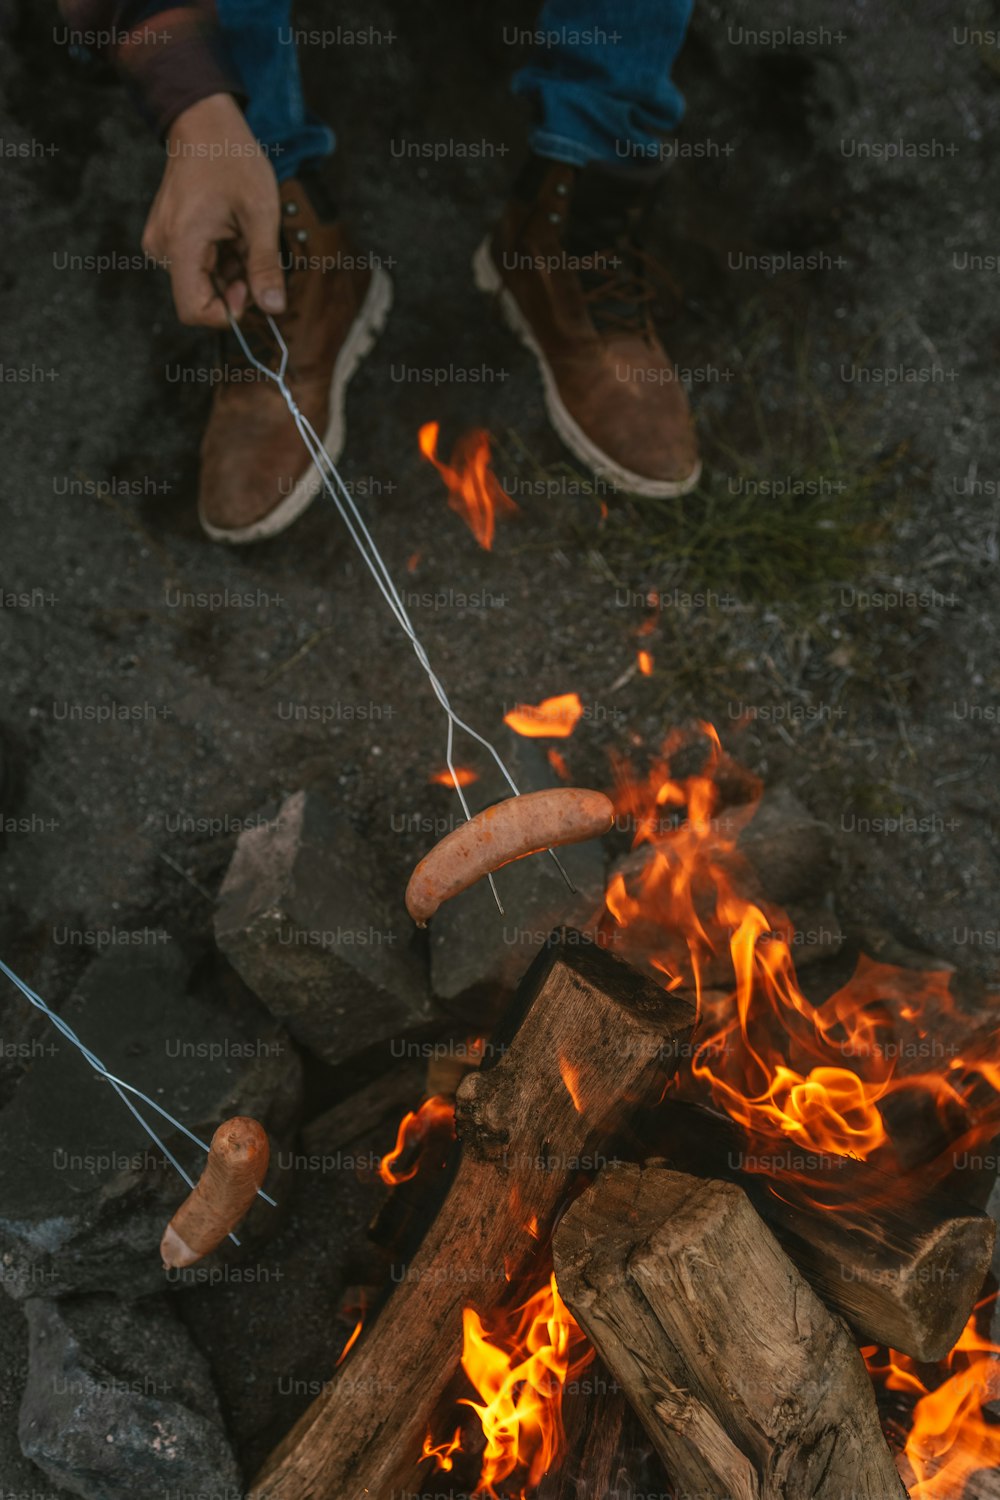 a hot dog is being cooked over a campfire